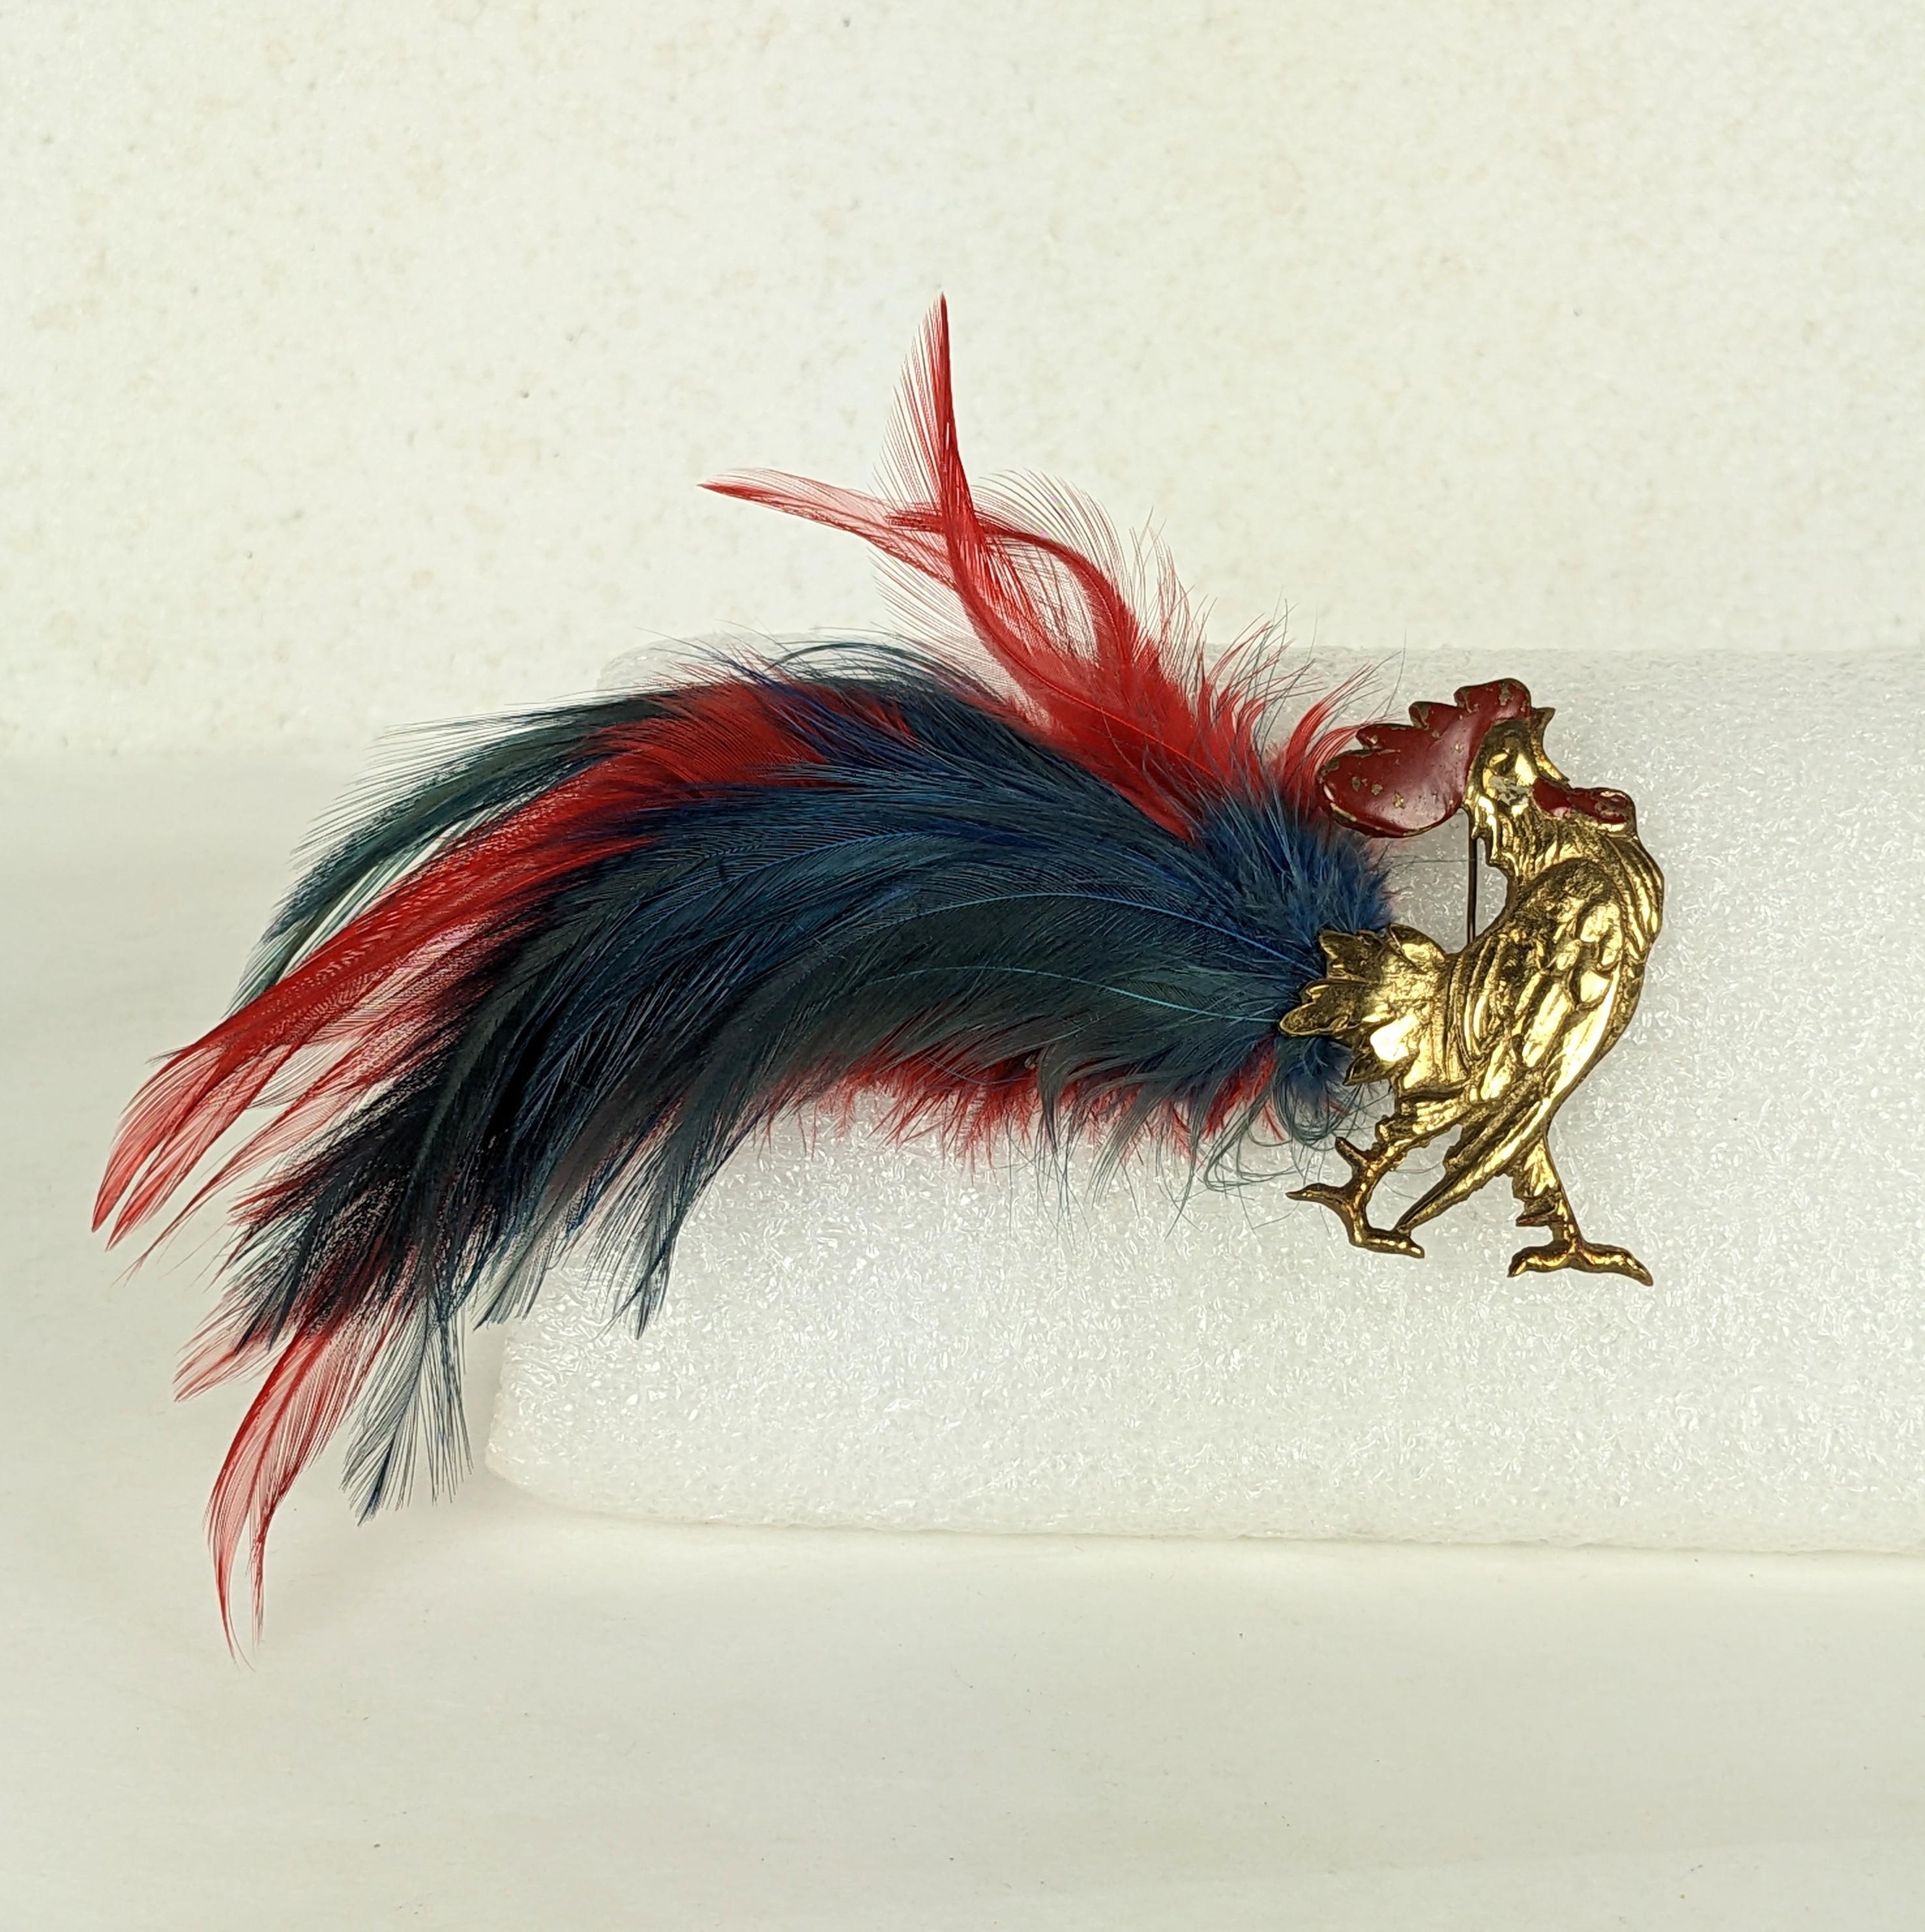 Striking French Patriotic Rooster Brooch in bronze with red and blue feathers and red cold enamel  from the 1940's. Measures 6